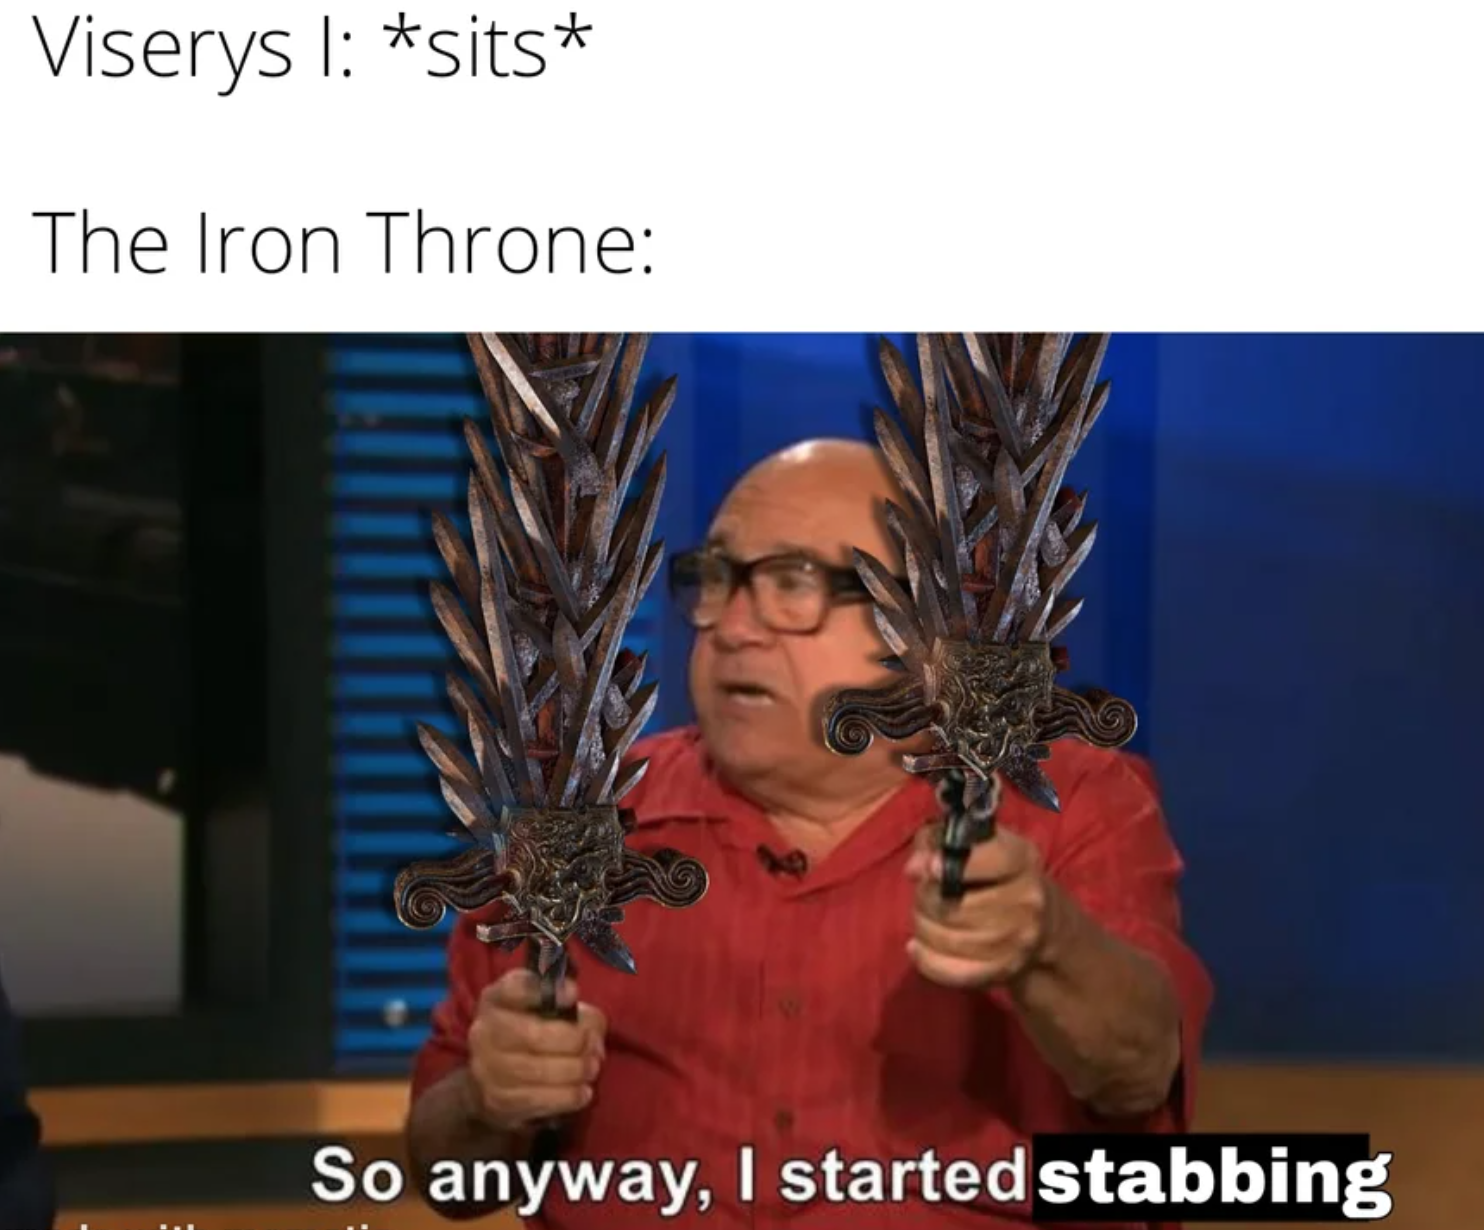 House of the Dragon Episode 2 memes - evanescence my immortal lyrics - Viserys I sits The Iron Throne So anyway, I started stabbing